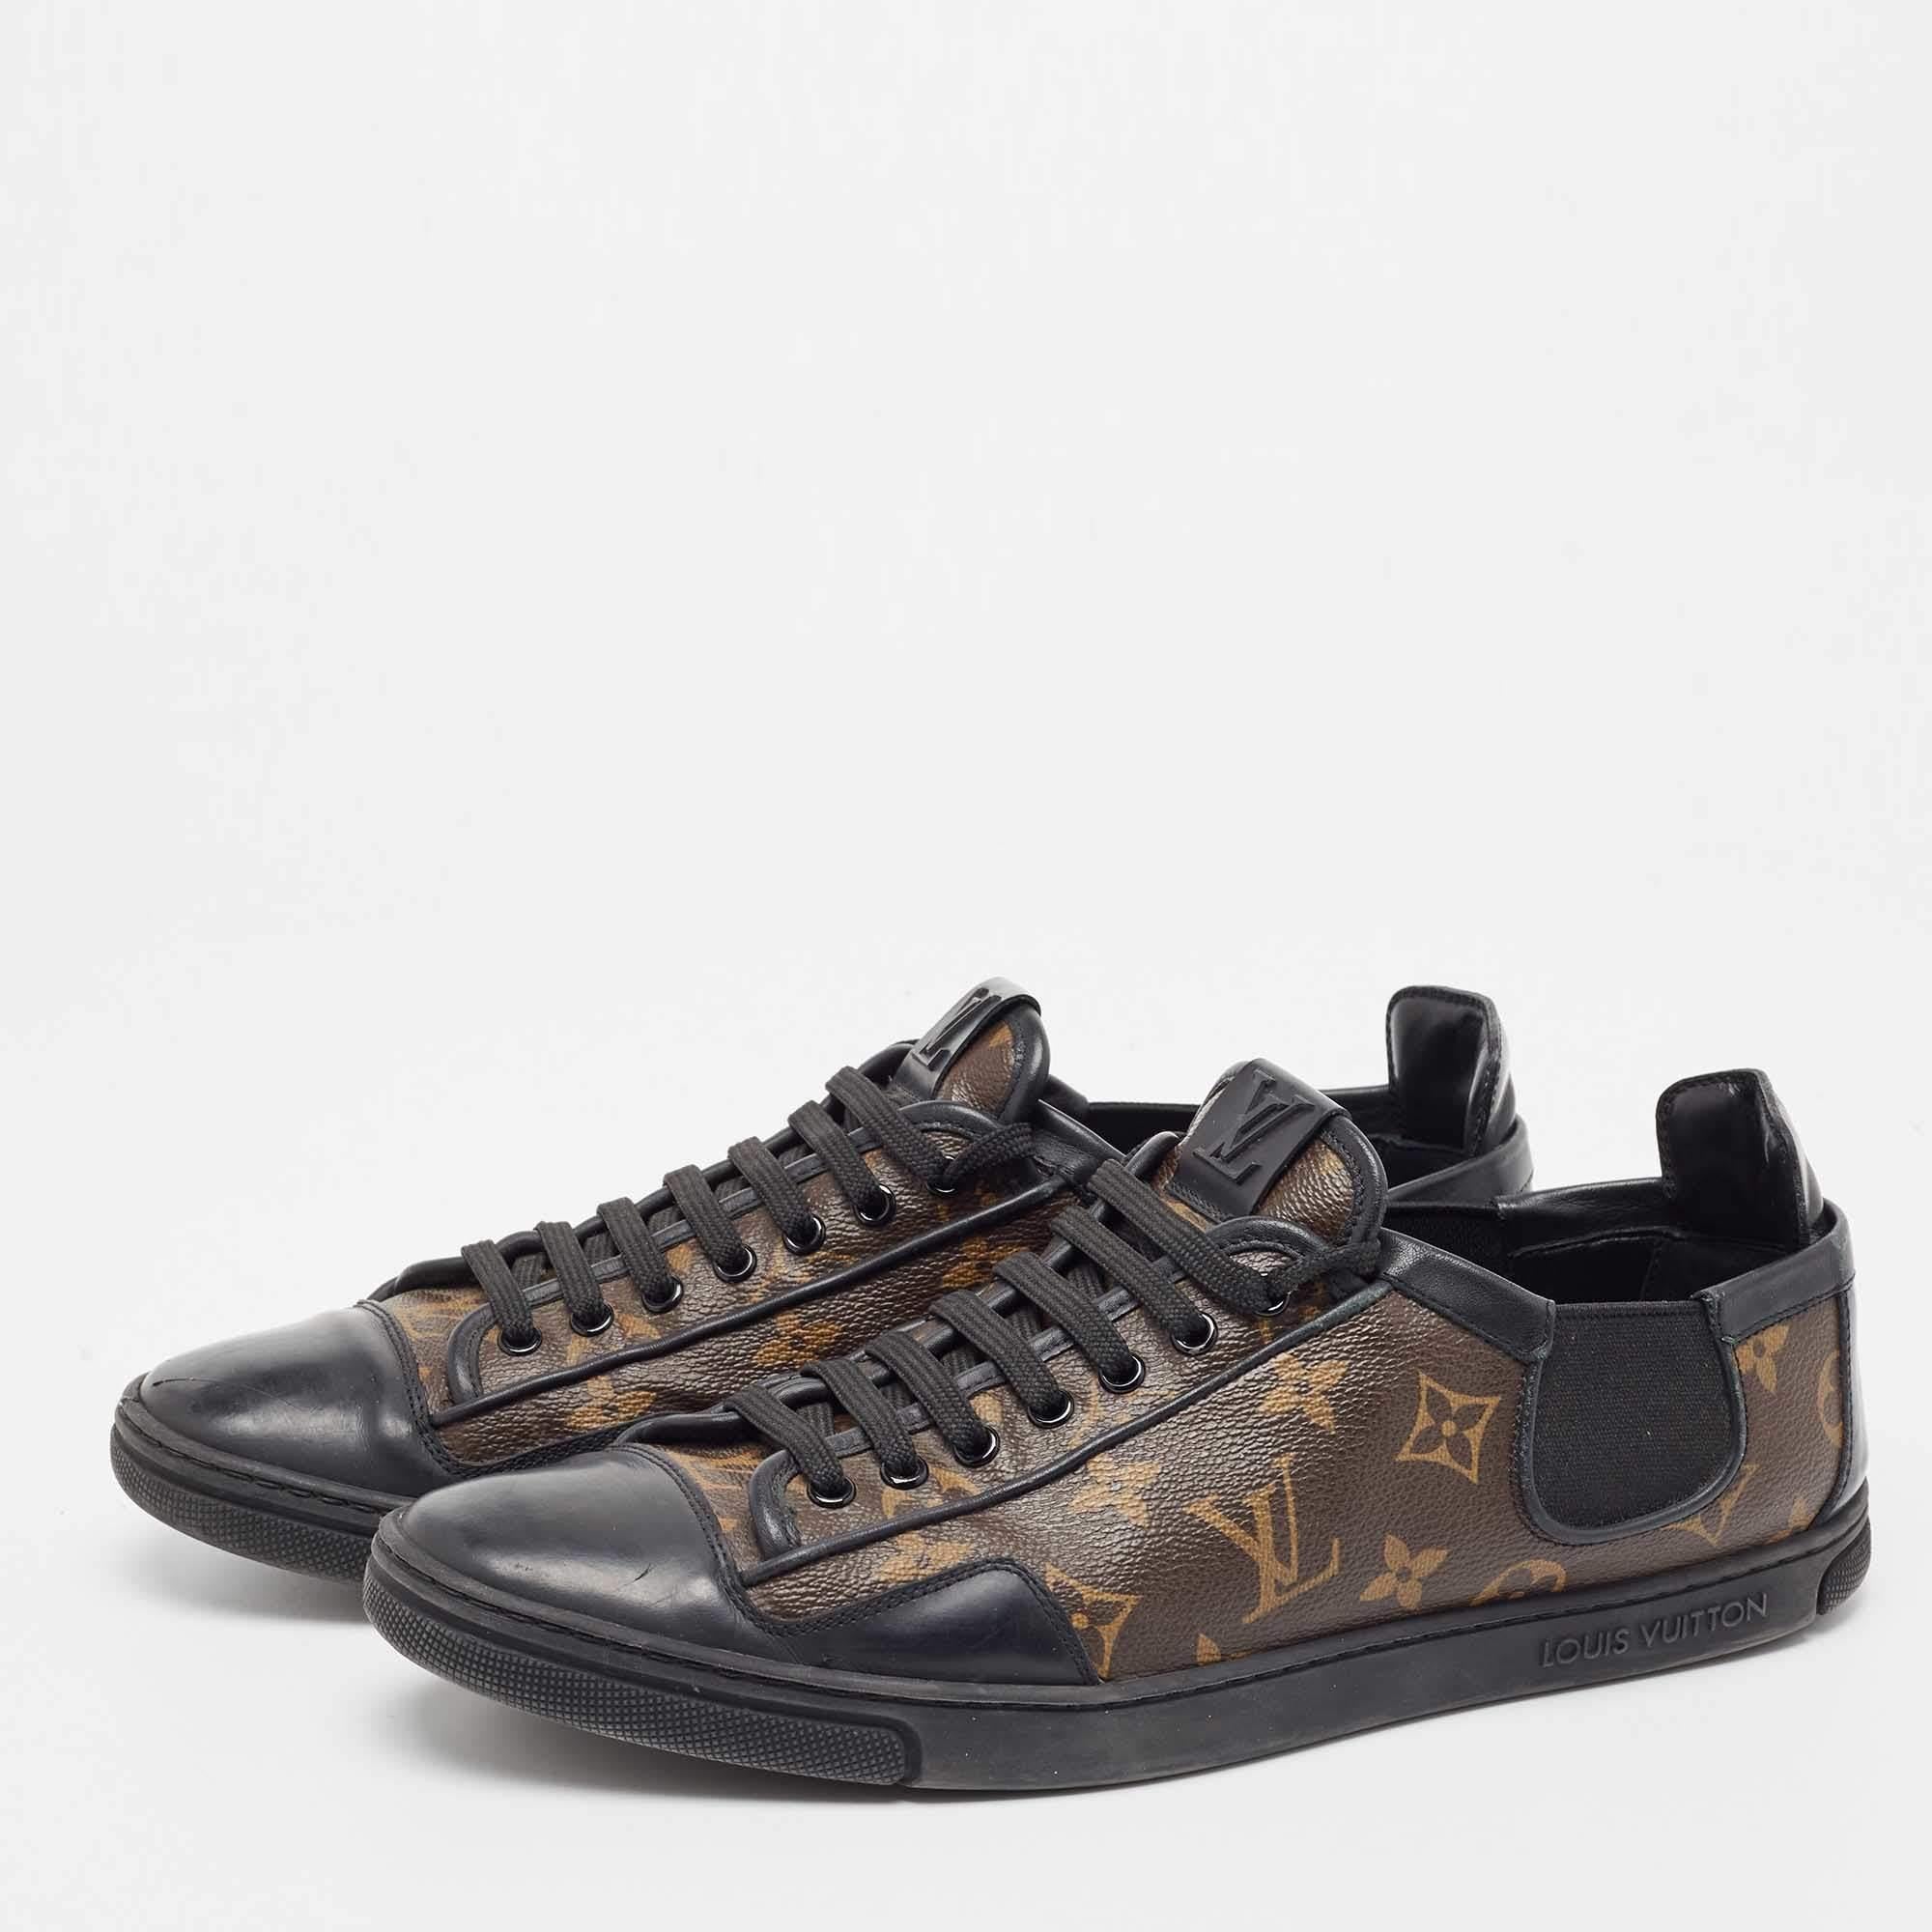 Show off your love for the brands in fashion with these sneakers by Louis Vuitton. These shoes have a rubber outsole and a canvas body that is covered in the LV Monogram.

Includes: Info Booklet, Original Box